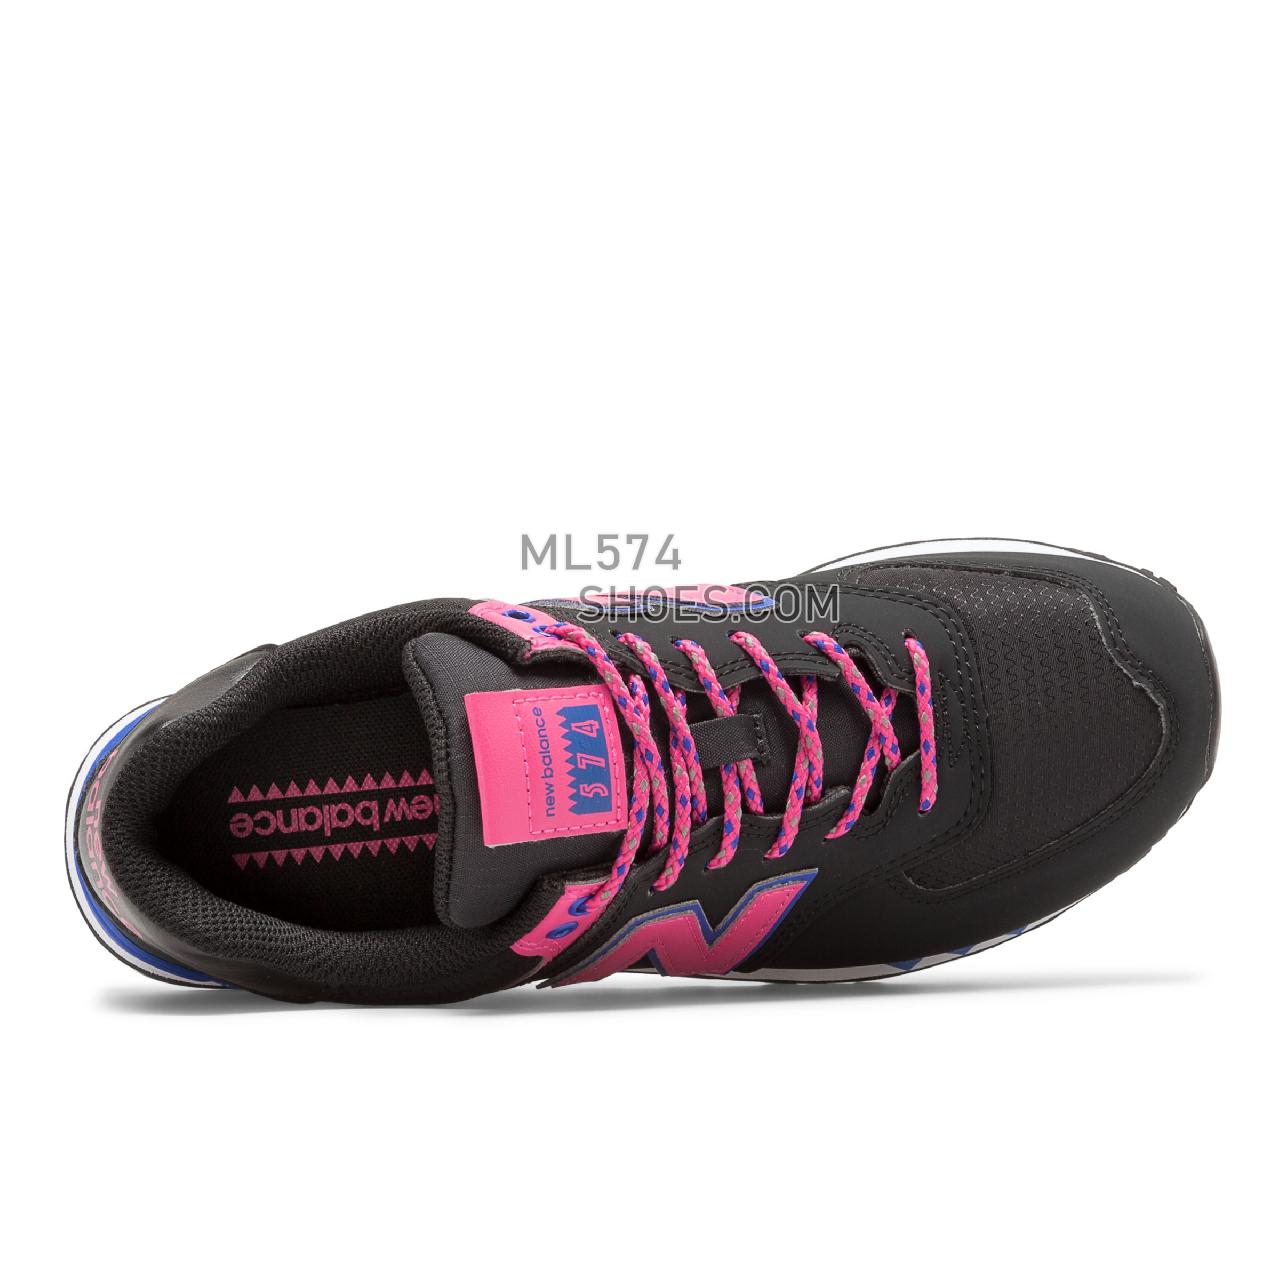 New Balance 574 - Women's Classic Sneakers - Black with Pink - WL574JOA